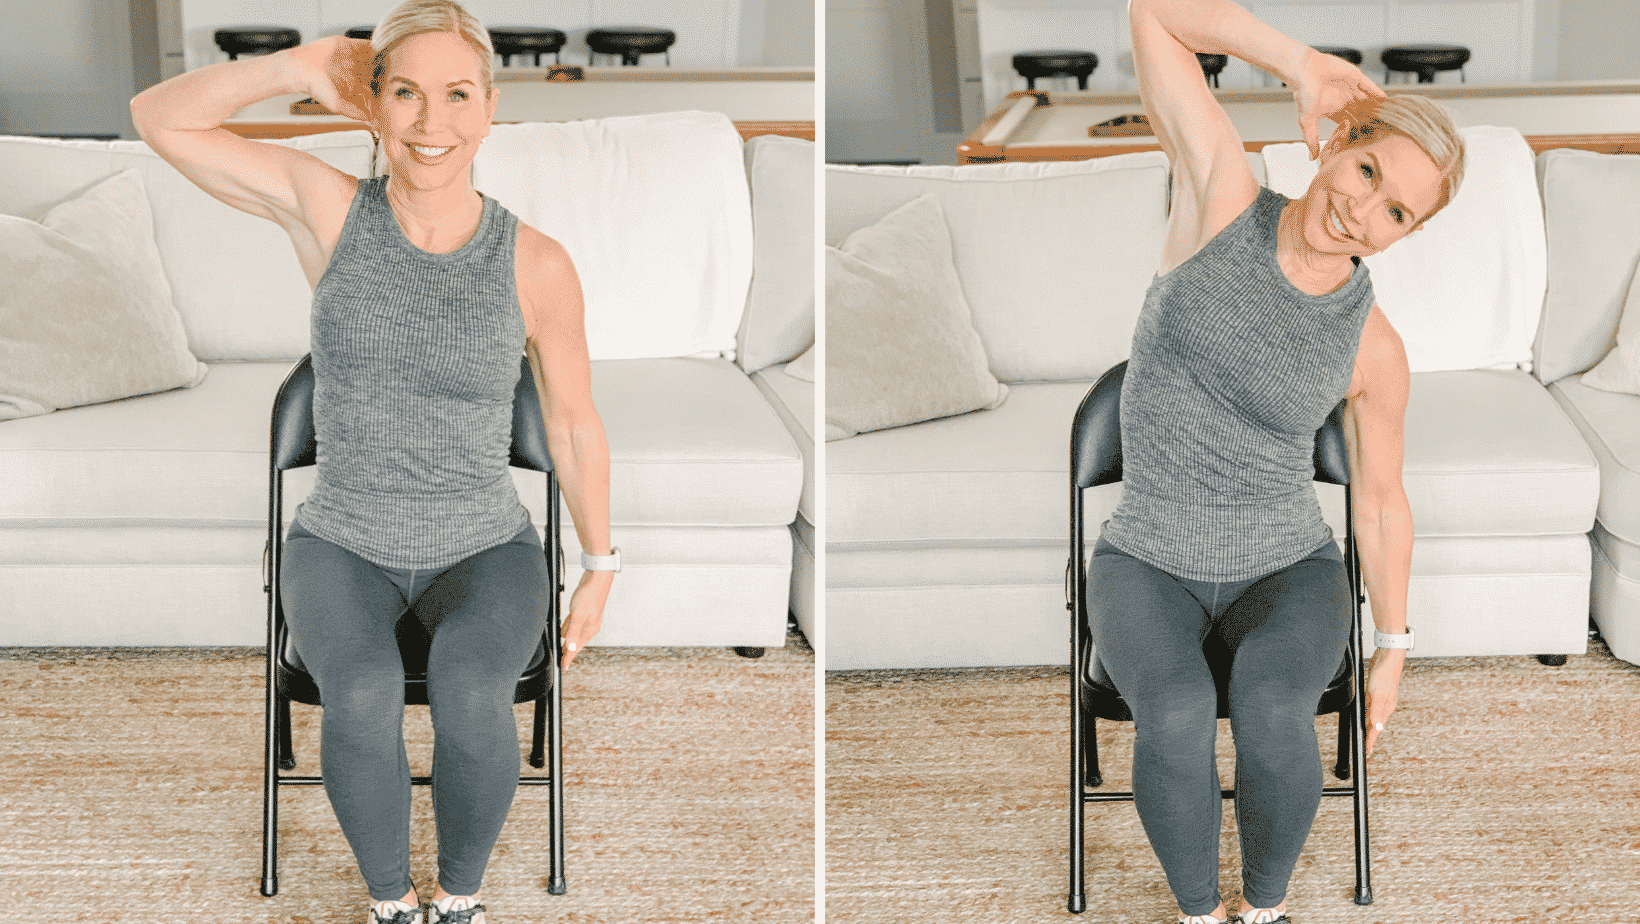 Chris Freytag demonstrating core exercise for seniors – seated side bends